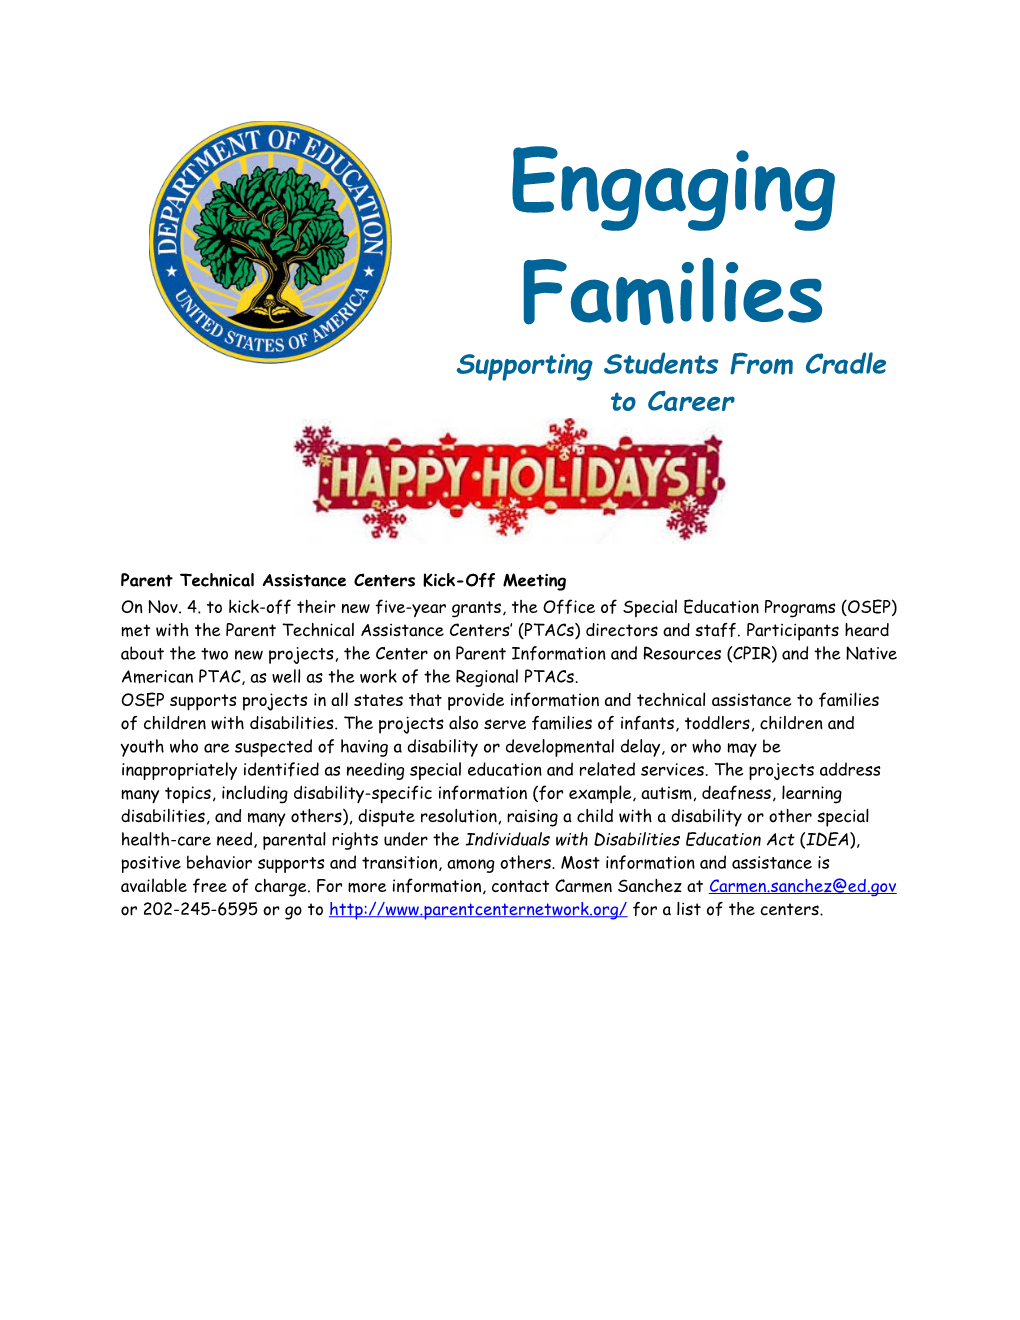 Engaging Families: Supporting Students from Cradle to Career, Volume III, Issue 3, Winter